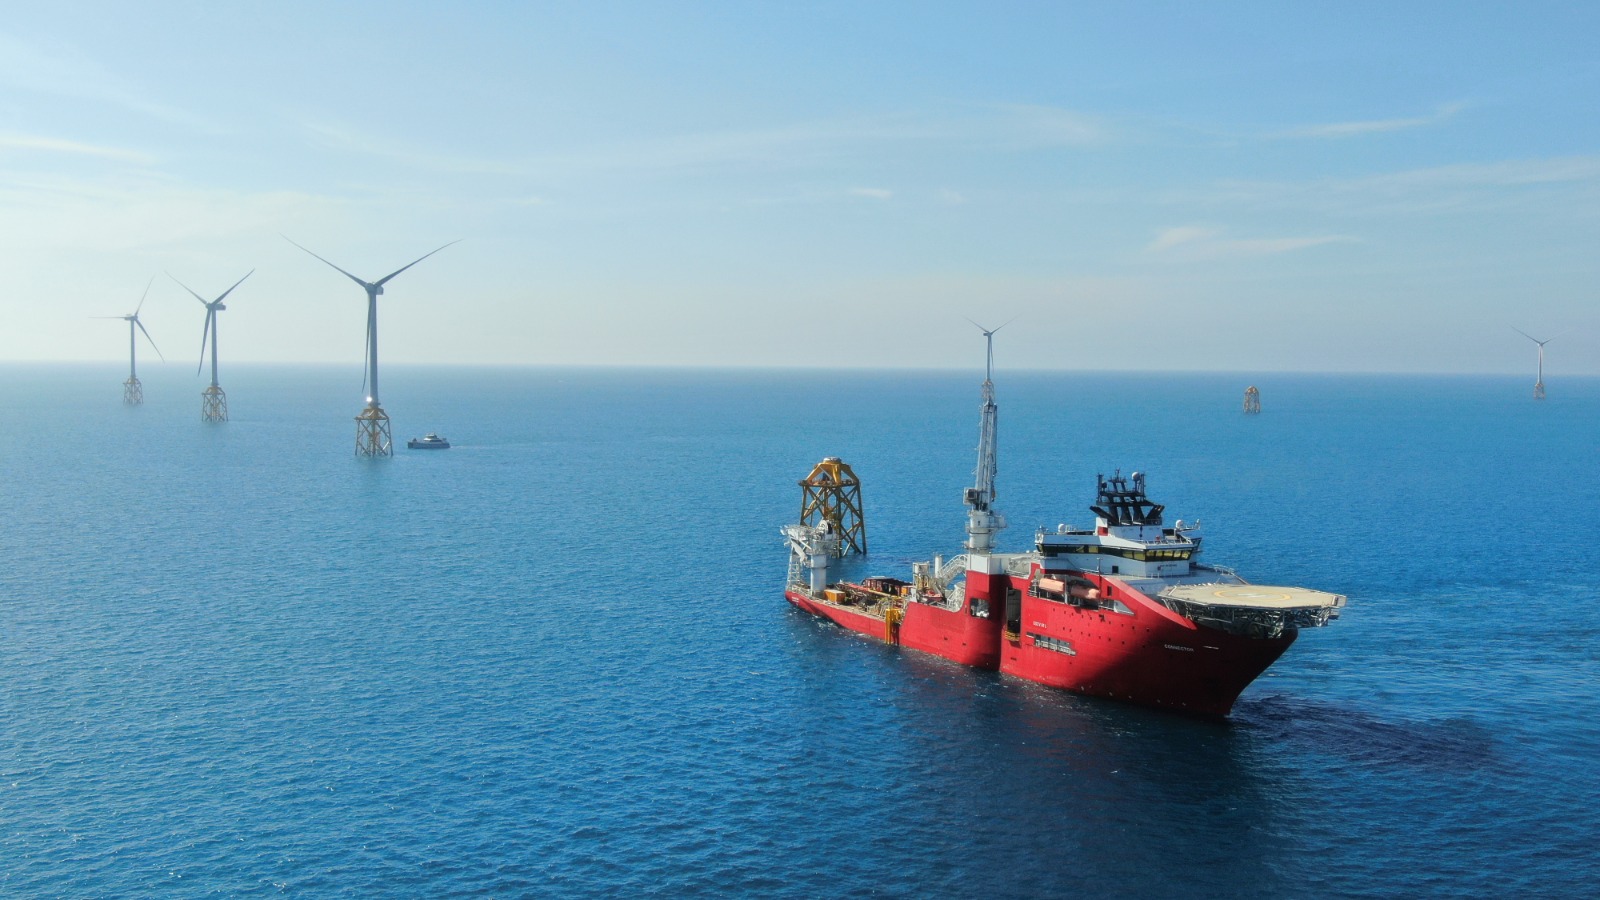 A photo by Jan De Nul showing the installation of the final turbine at the TPC Changhua Phase 1 offshore wind farm